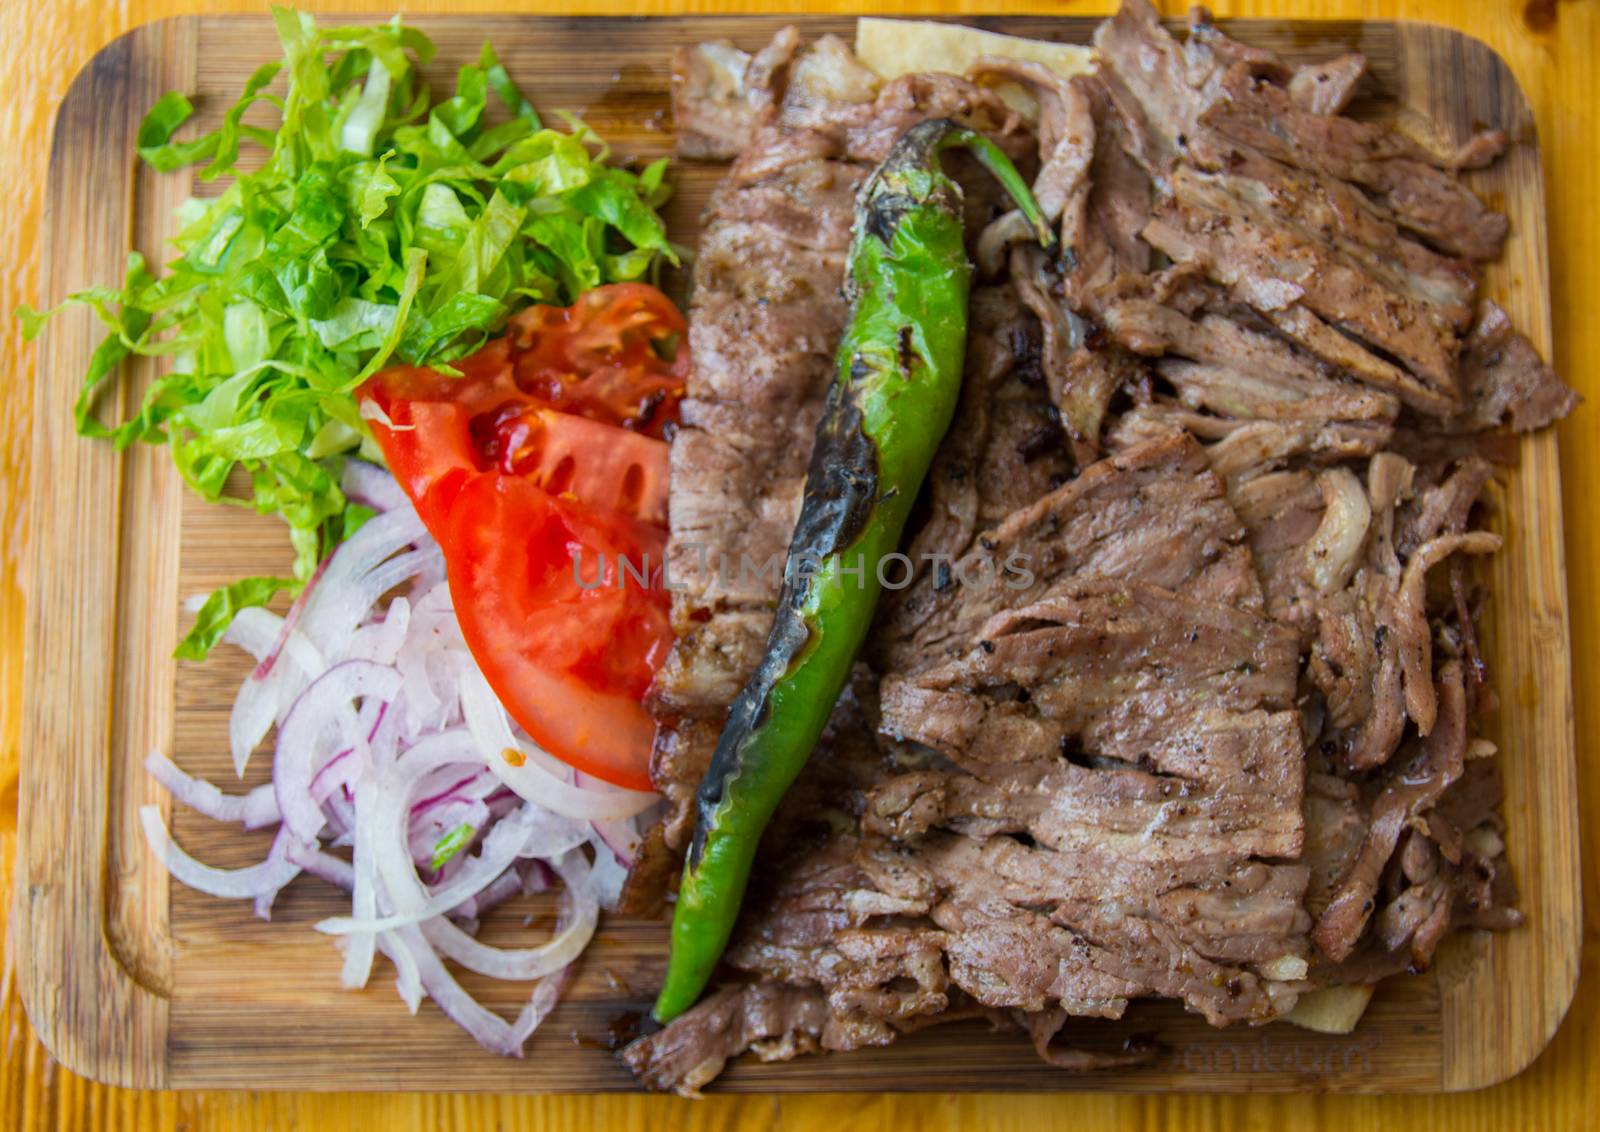 "Döner Kebab" is served with fresh greens on the board. 
famous turkish food. Döner kebab is a Turkish kebab, made of meat cooked on a vertical rotisserie.